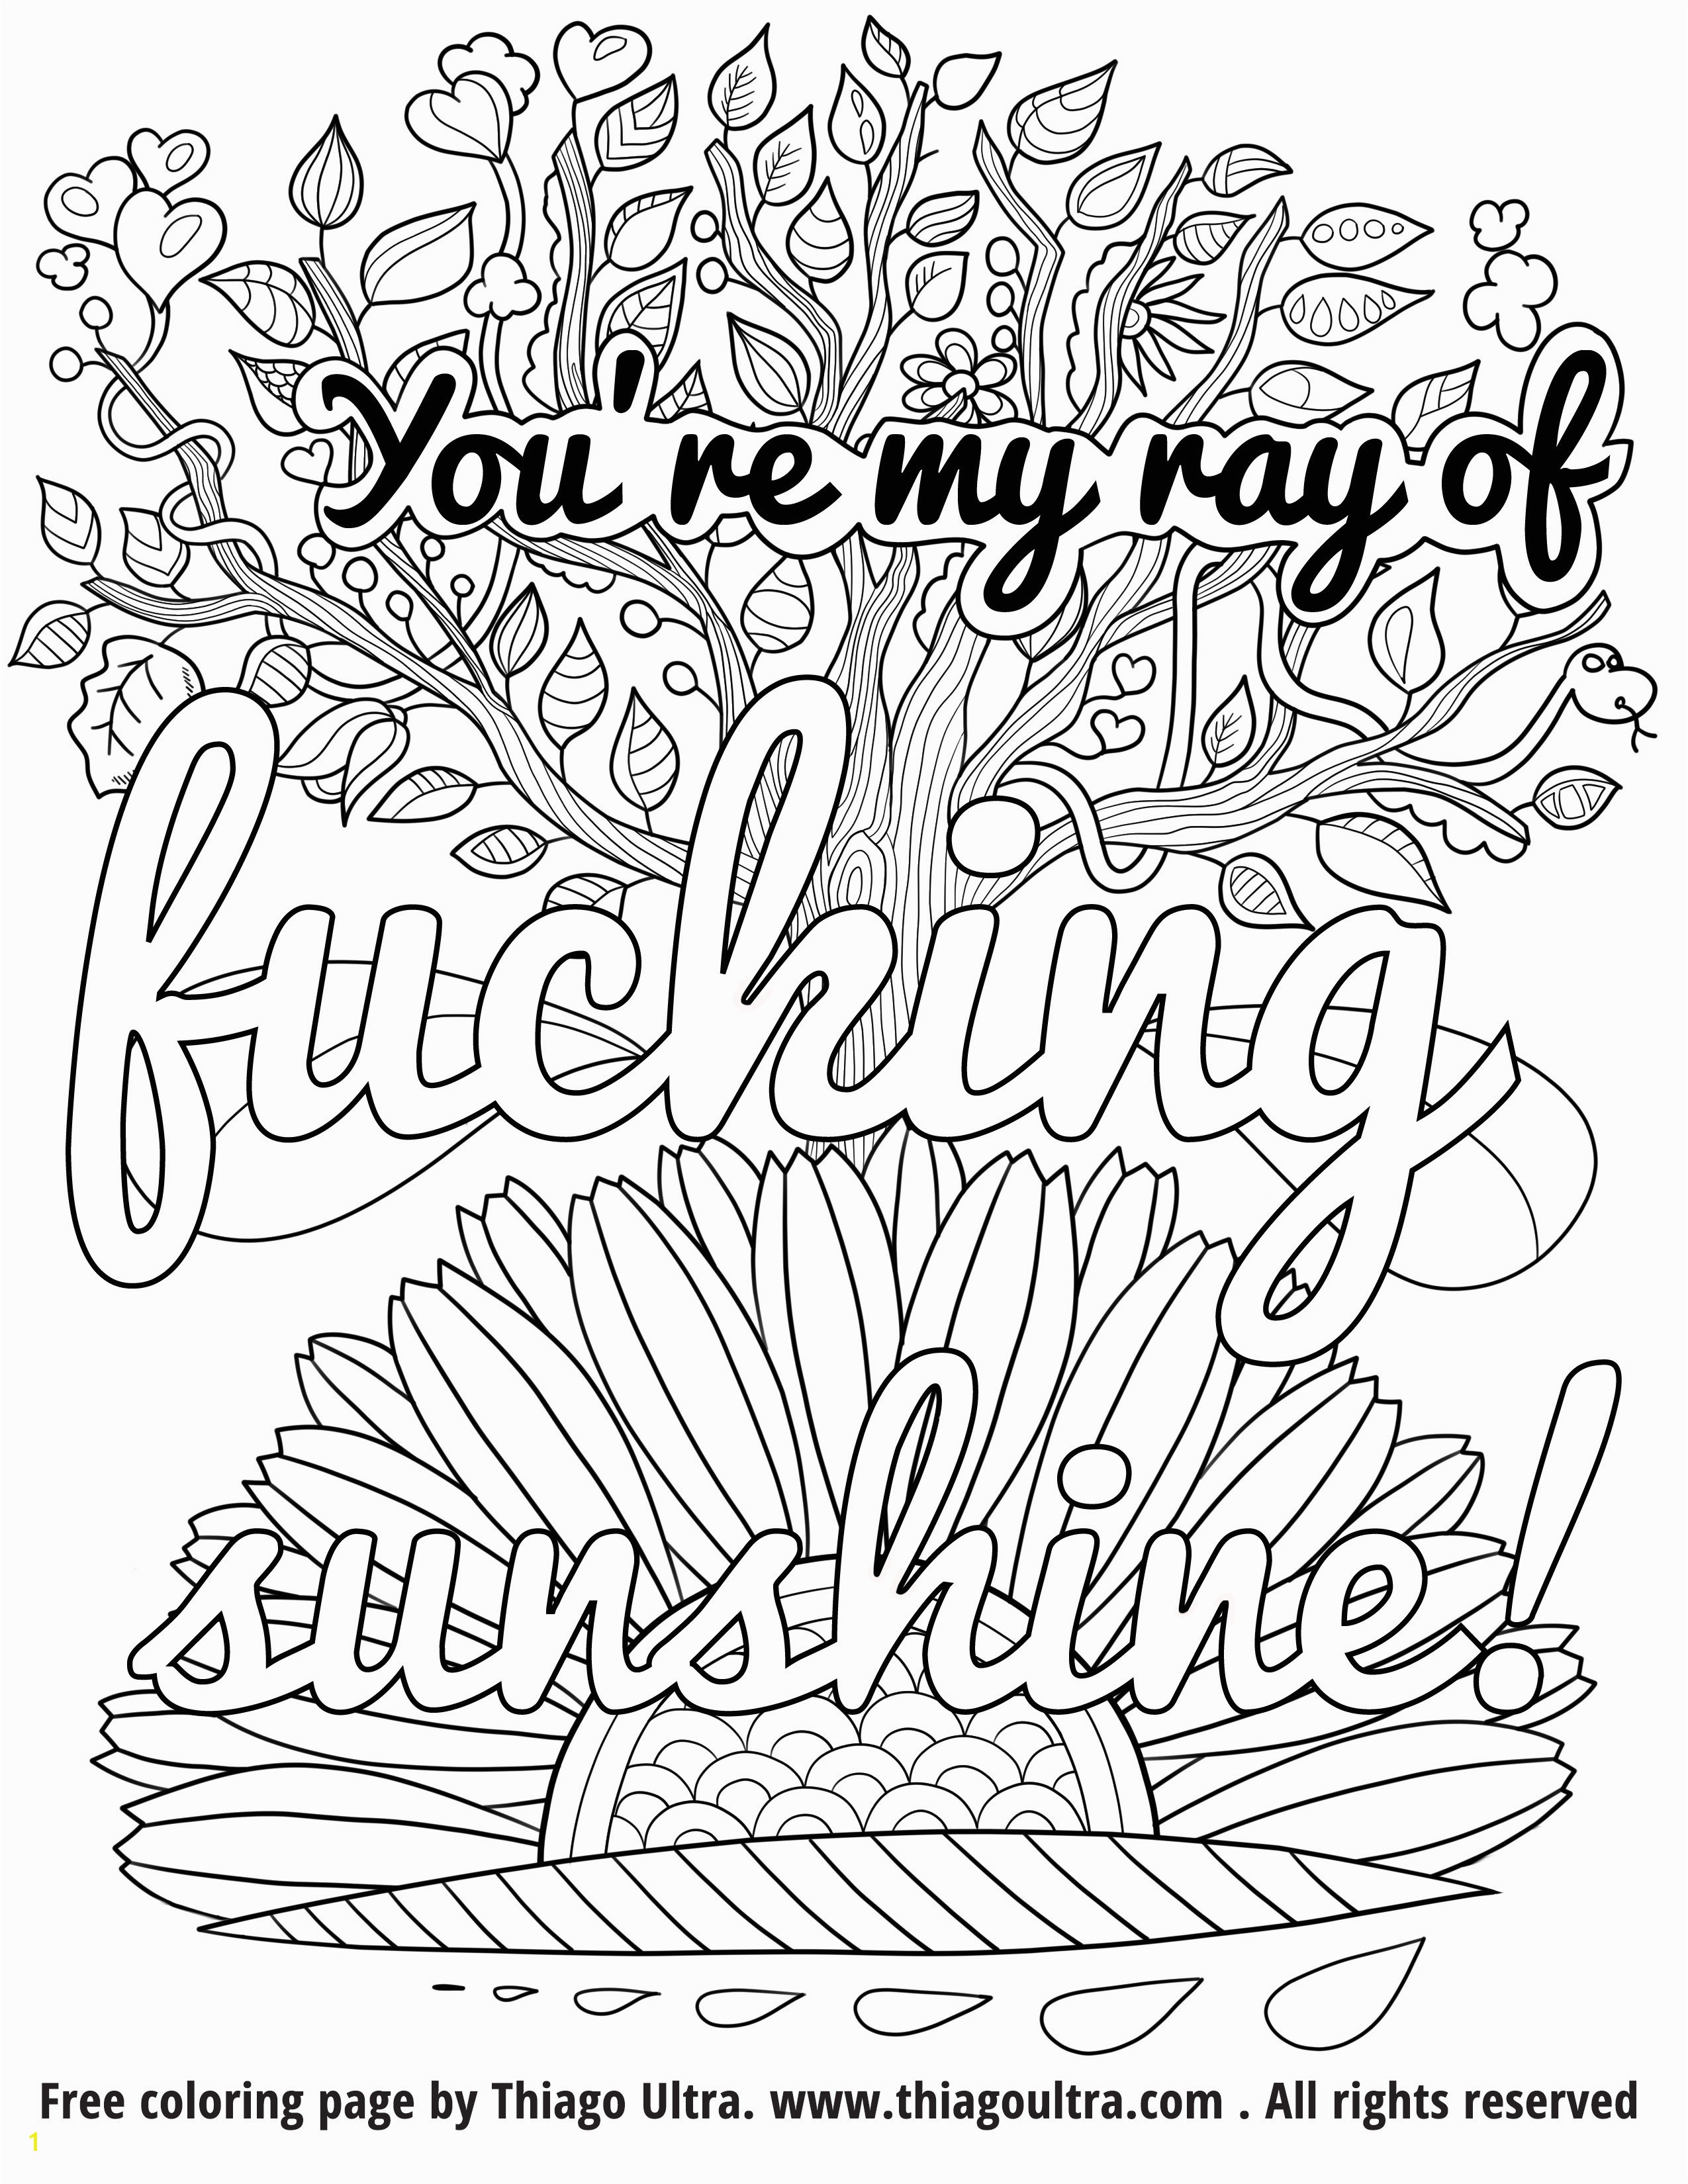 Fun Coloring Pages for Adults Online Fun Coloring Pages for Adults Line Inspirational Line Coloring